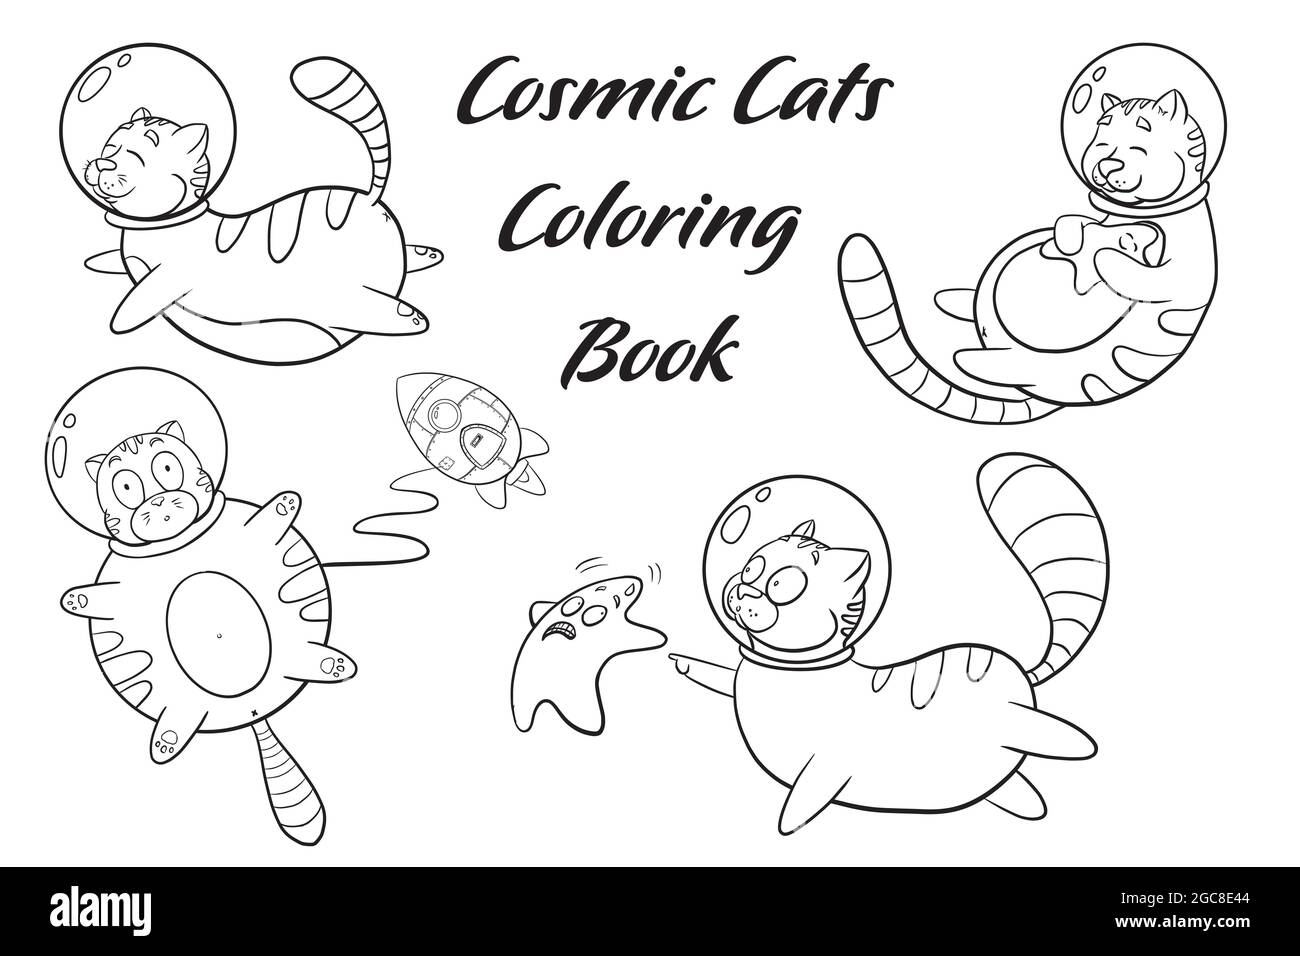 Cartoon Cats in Space Coloring Page. Funny Cosmic Cats sketch. Cute animals in space illustrations for coloring book Stock Vector